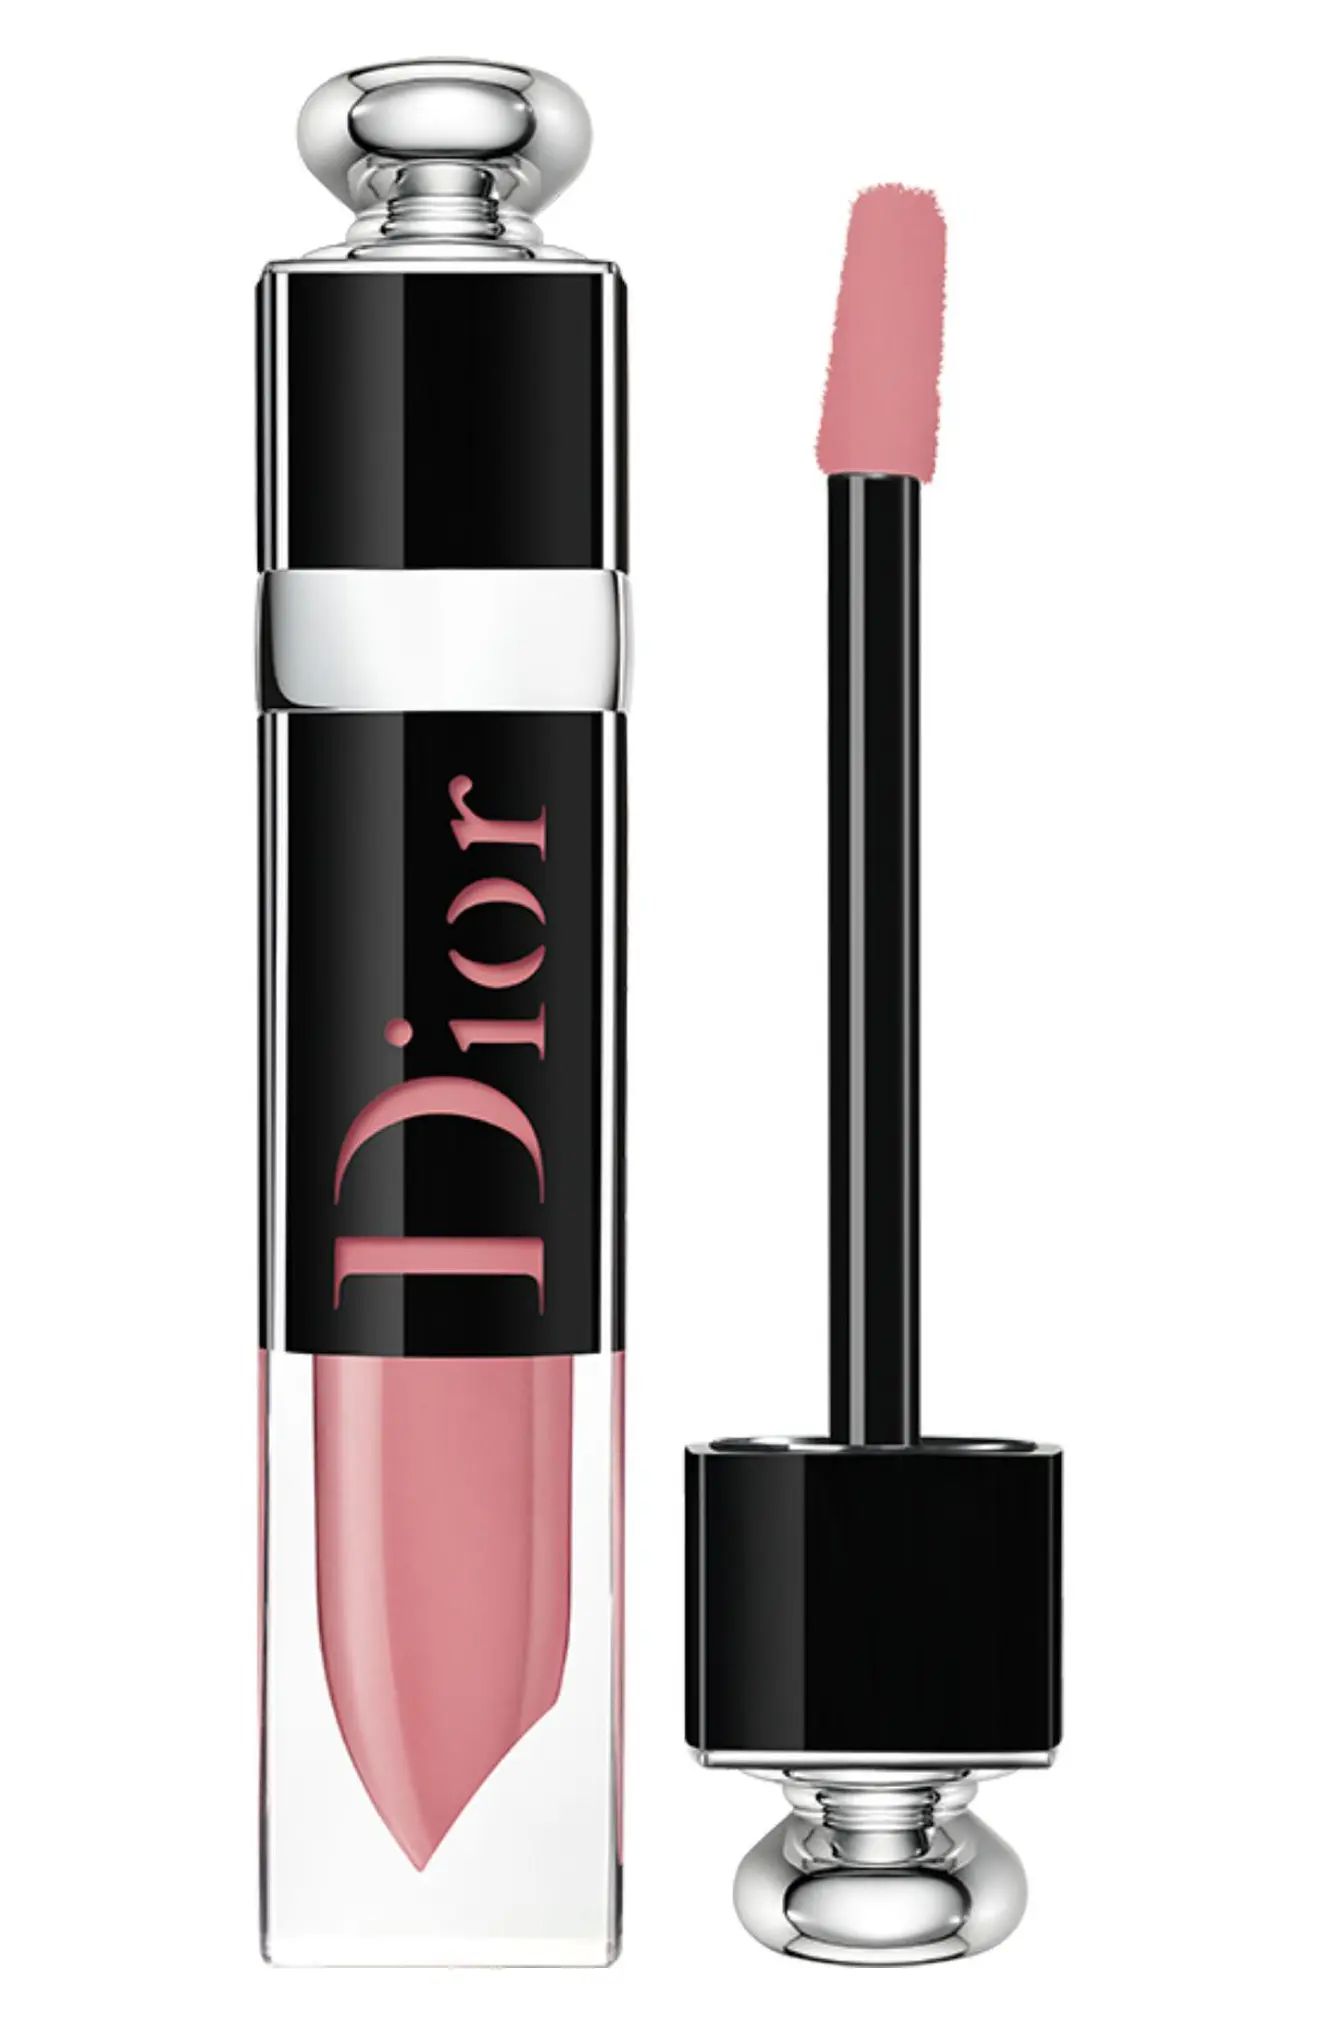 Dior Addict Lip Plumping Lacquer Ink - 426 Lovely-D /rosy Nude | Nordstrom